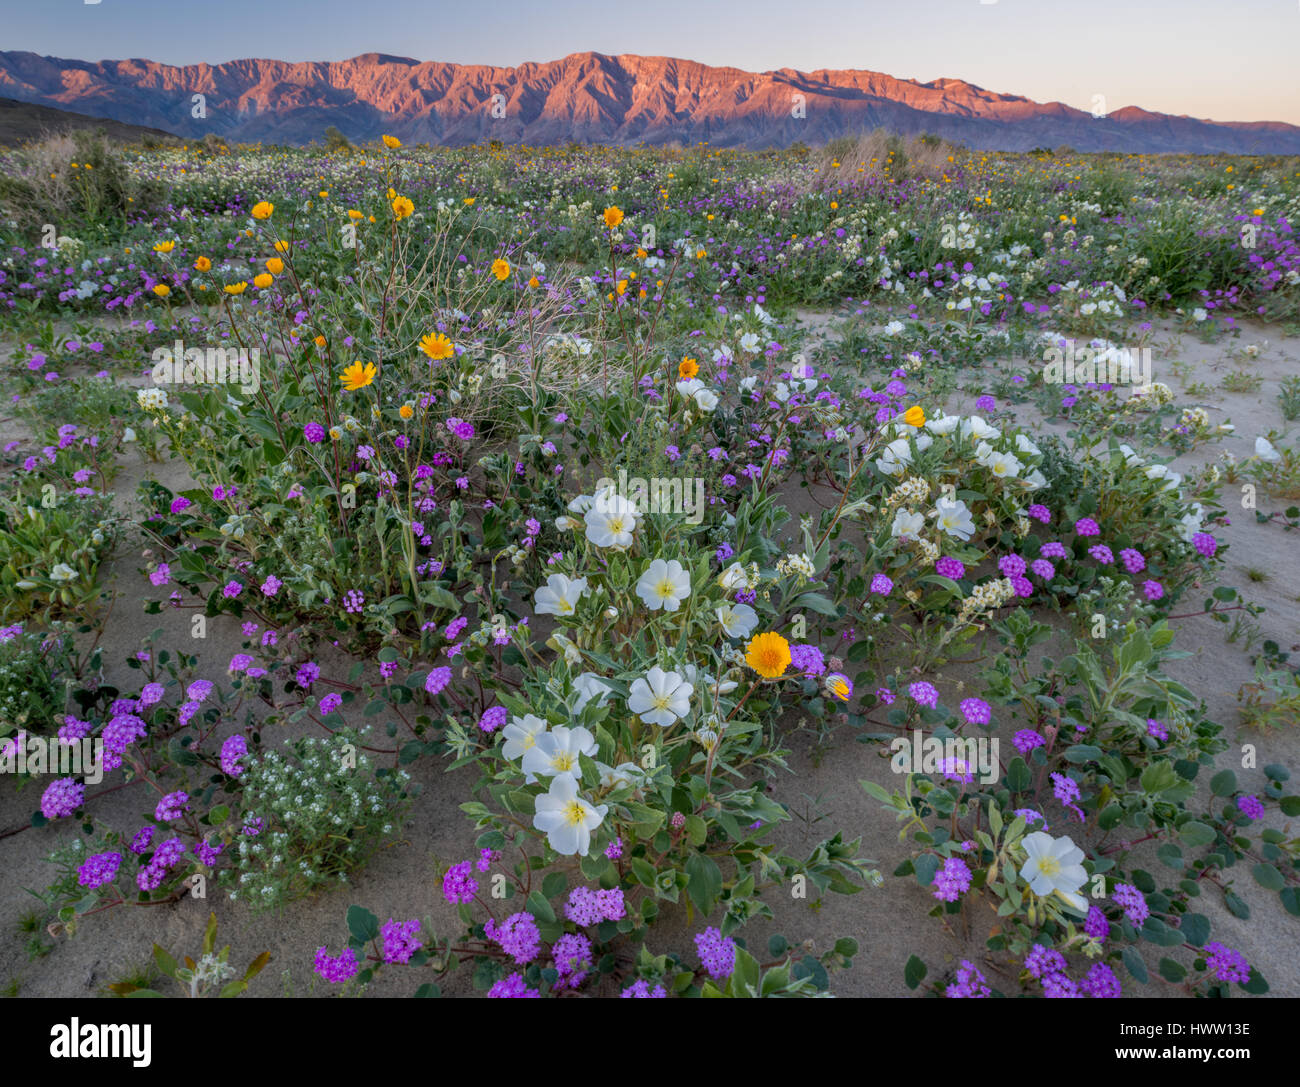 CALIFORNIA, USA: Desert landscape with flowering Sand verbena, Desert gold, and Birdcage evening primrose with the Santa Rosa Mountains in background, Stock Photo